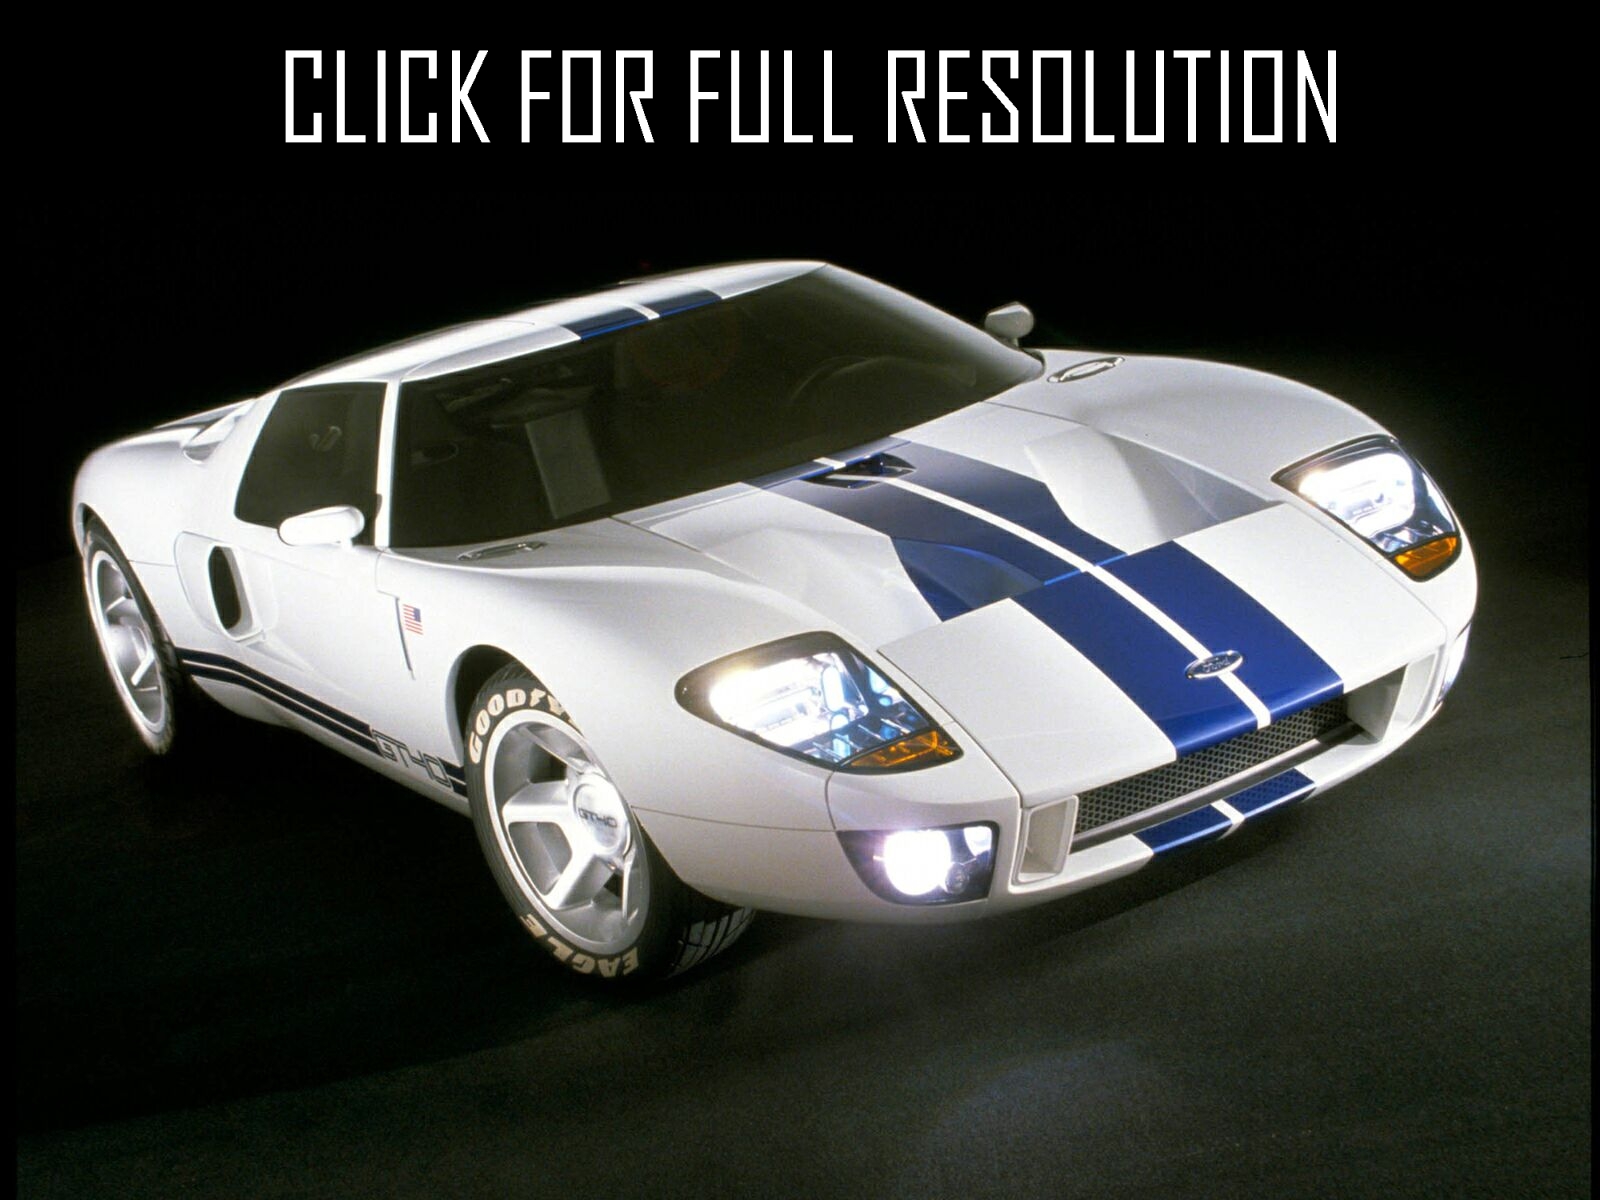 2004 Ford Gt40